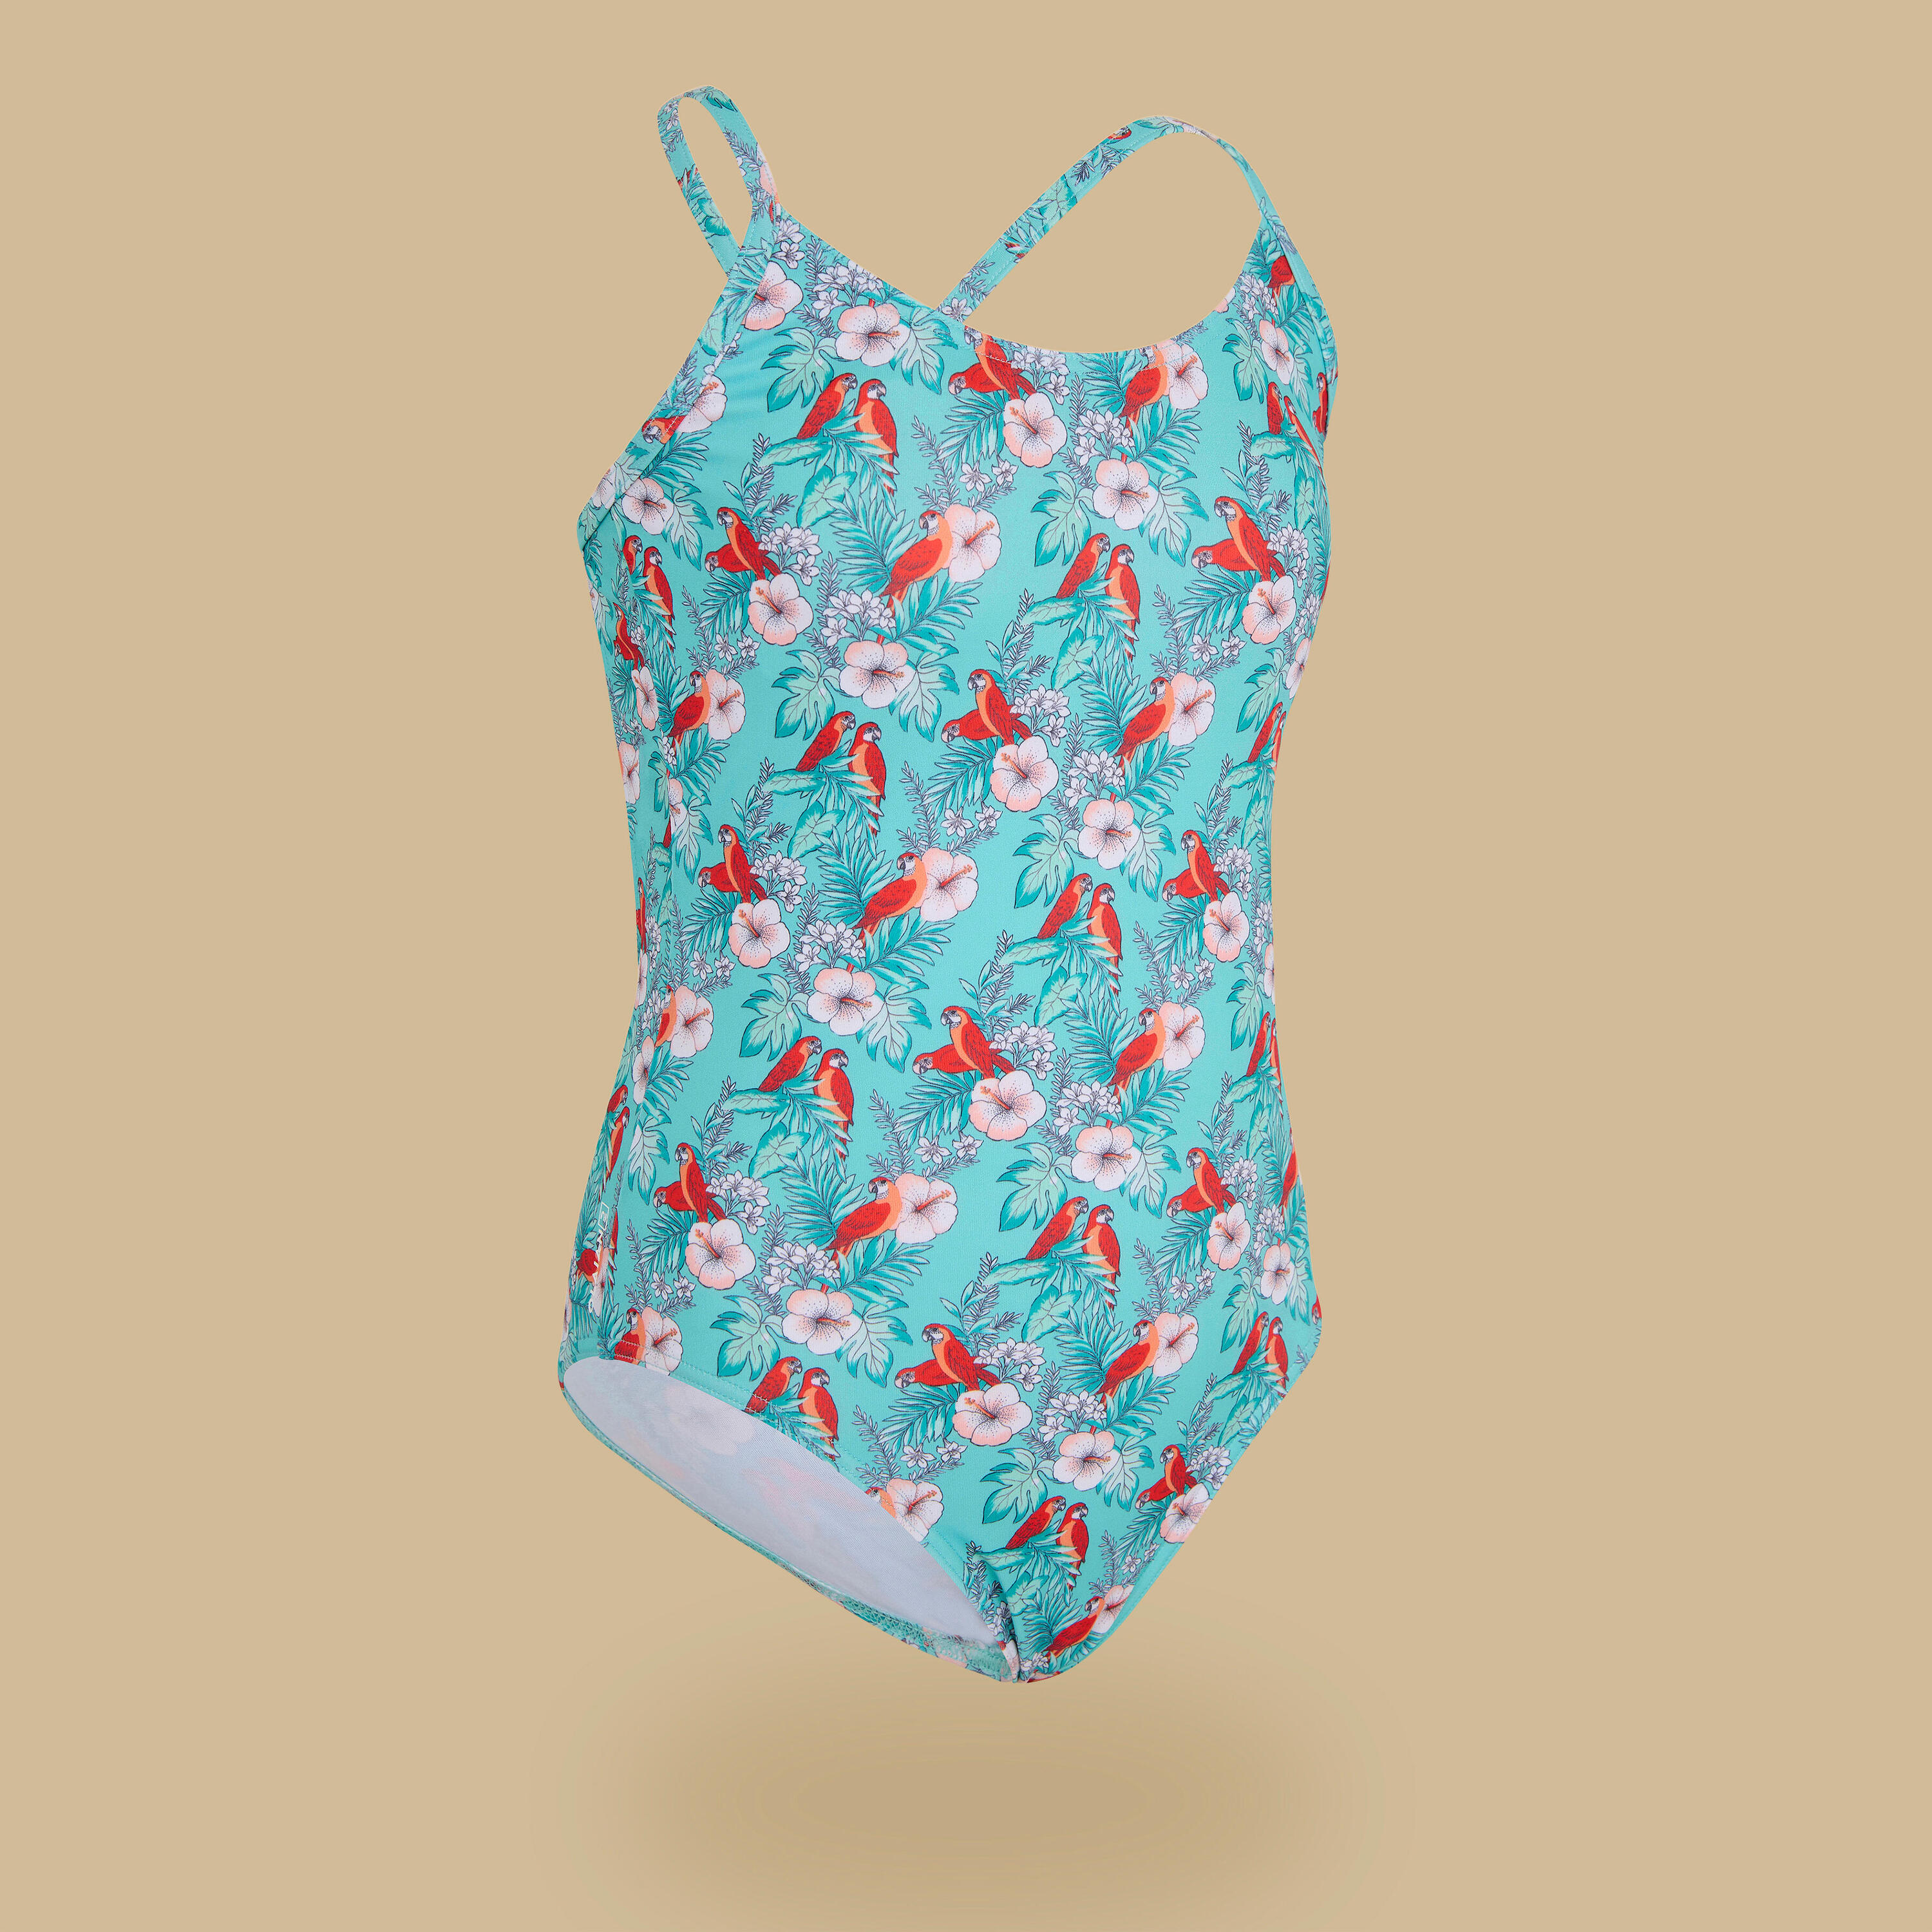 OLAIAN GIRL'S ONE-PIECE SWIMSUIT 100 COCO TURQUOISE